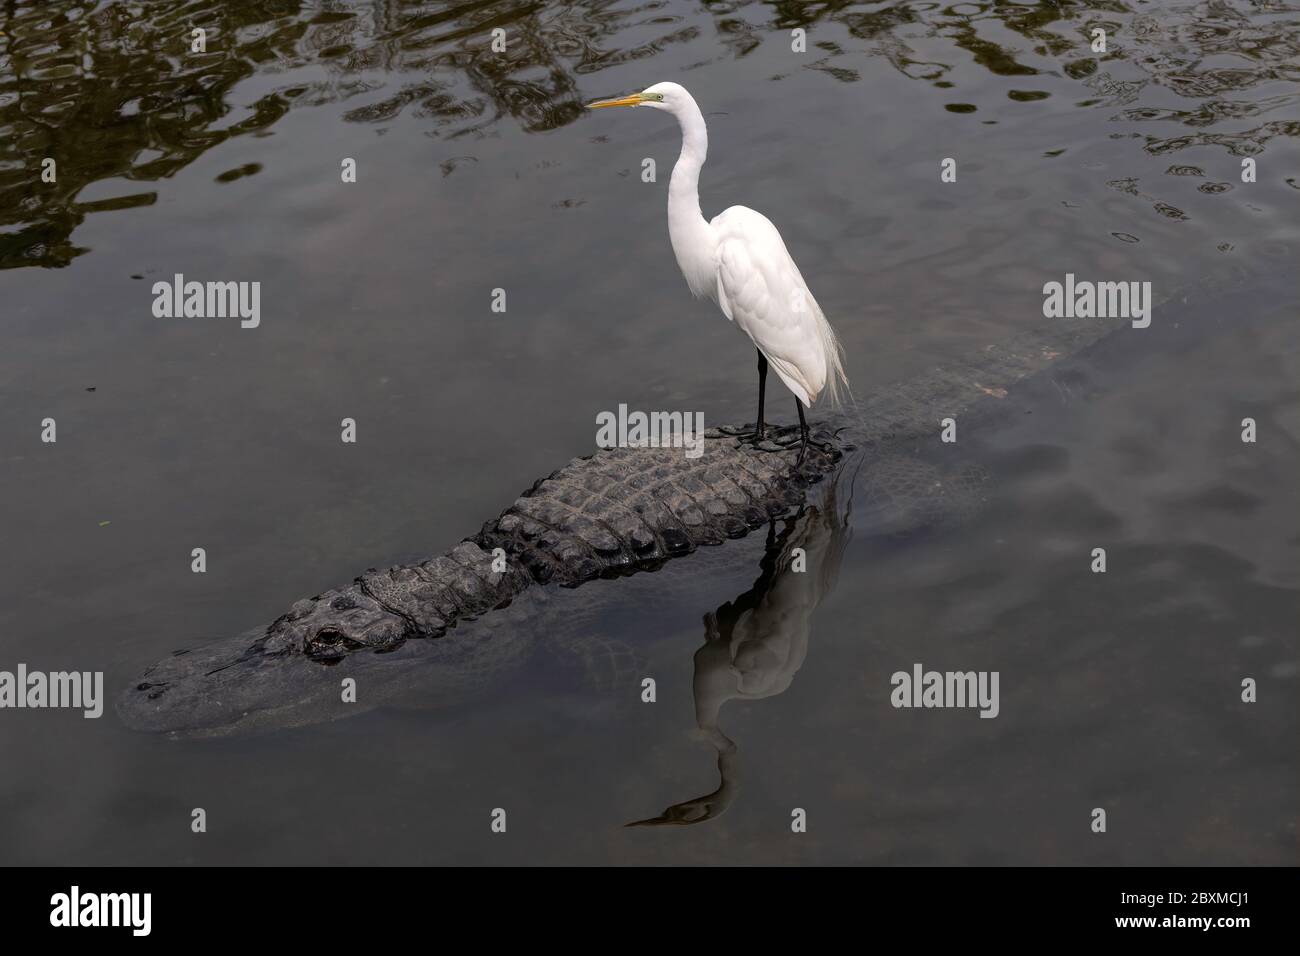 Egret standing on an alligator's back, with a beautiful reflection in the water. Stock Photo